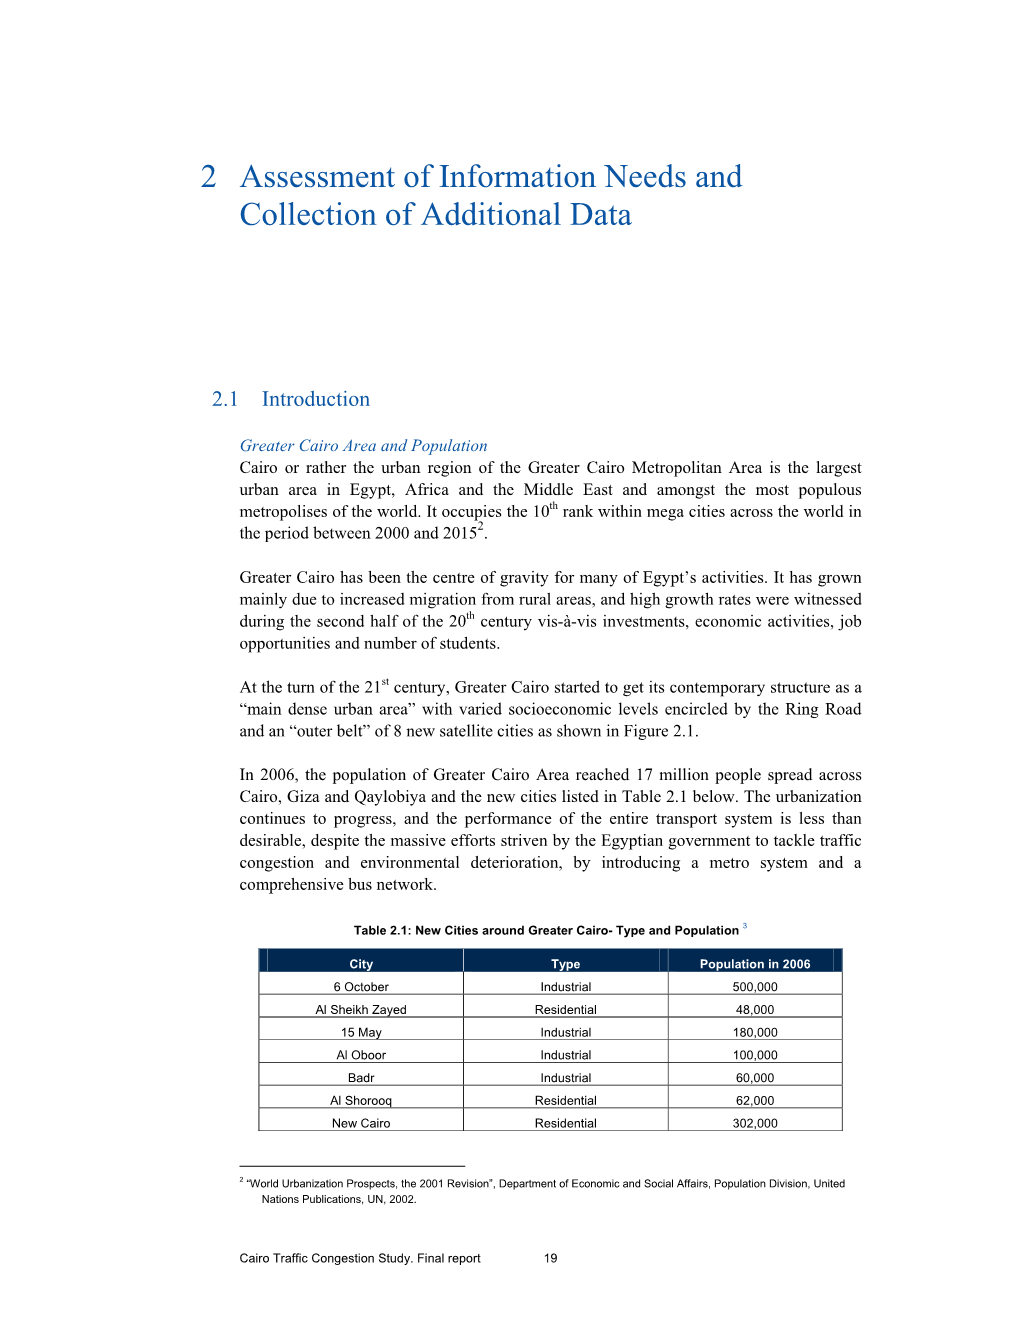 2 Assessment of Information Needs and Collection of Additional Data